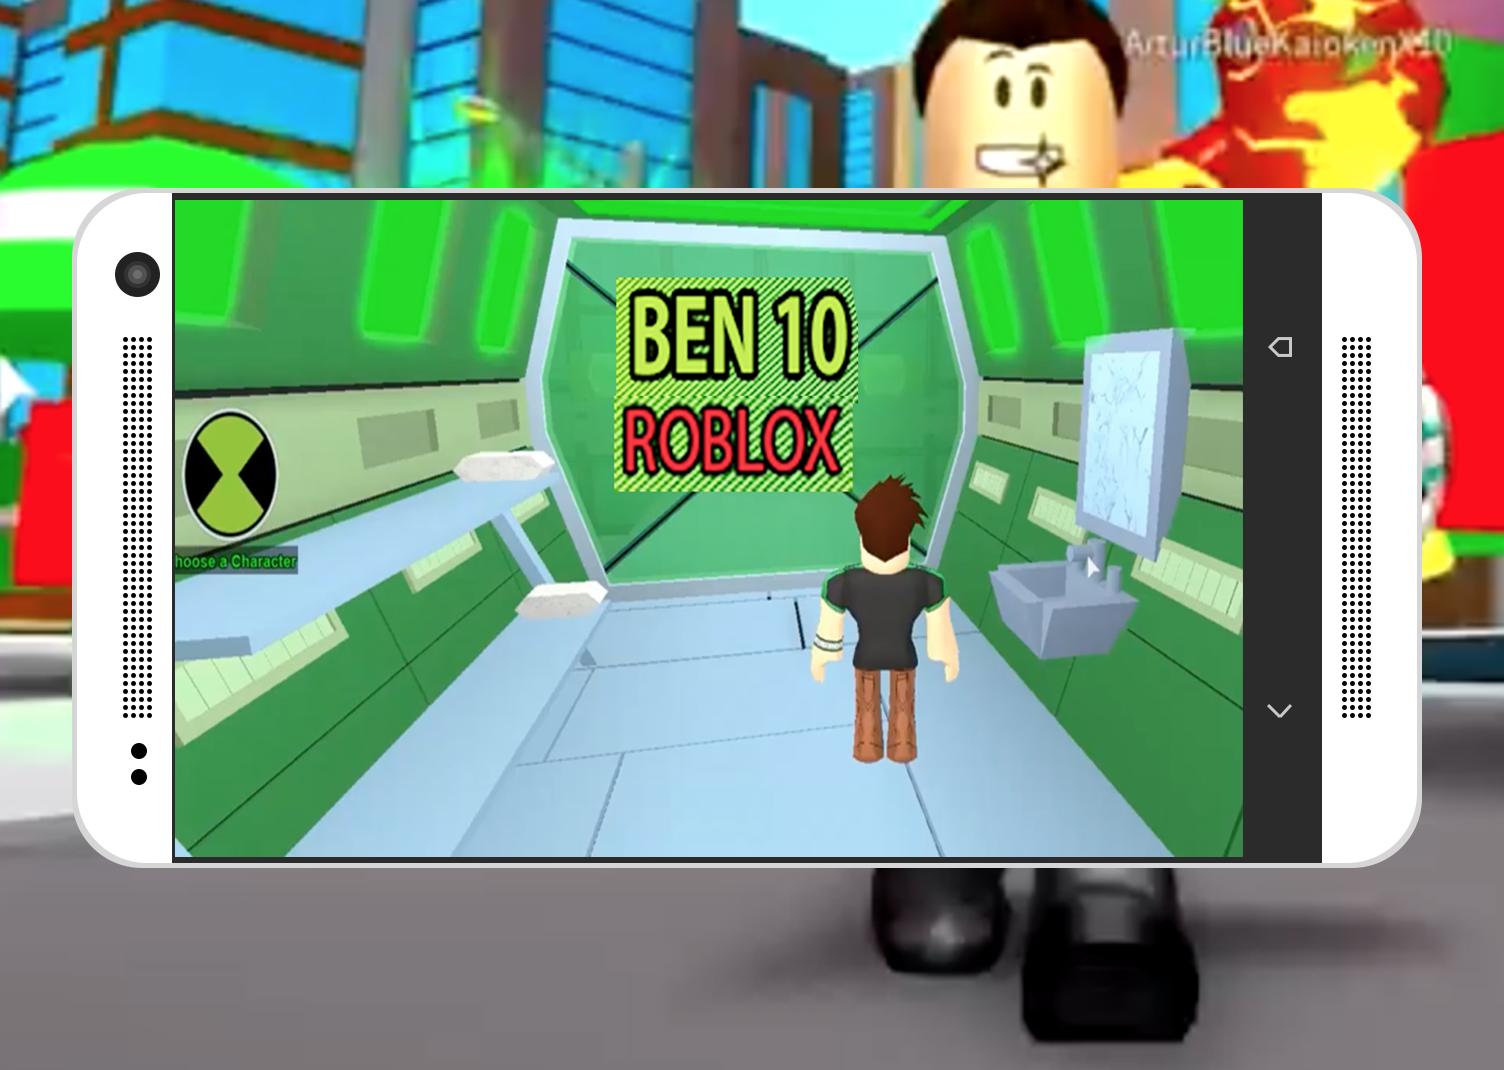 Guide For Ben 10 Evil Ben 10 Roblox For Android Apk Download - guide for ben 10 evil ben 10 roblox apk download latest